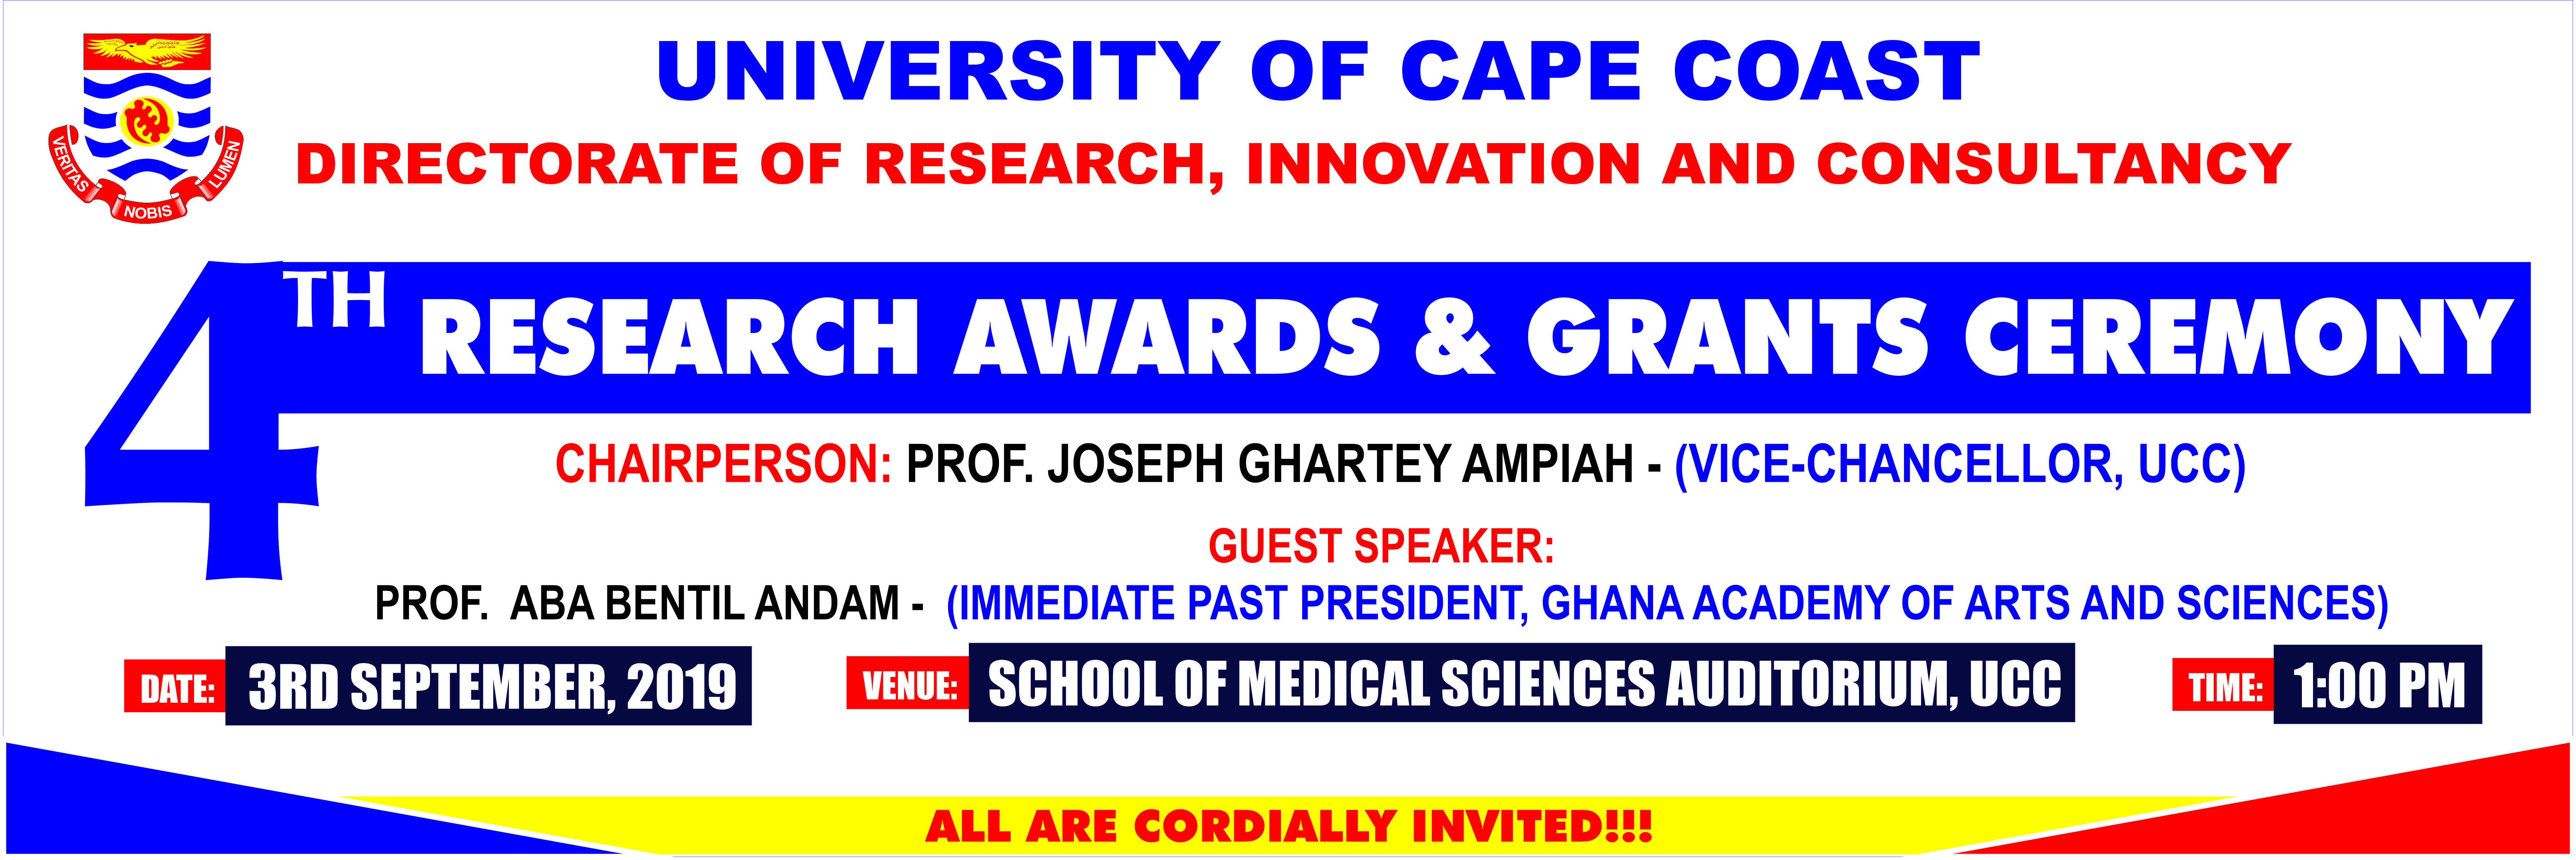 4th Research Awards and Grants Ceremony